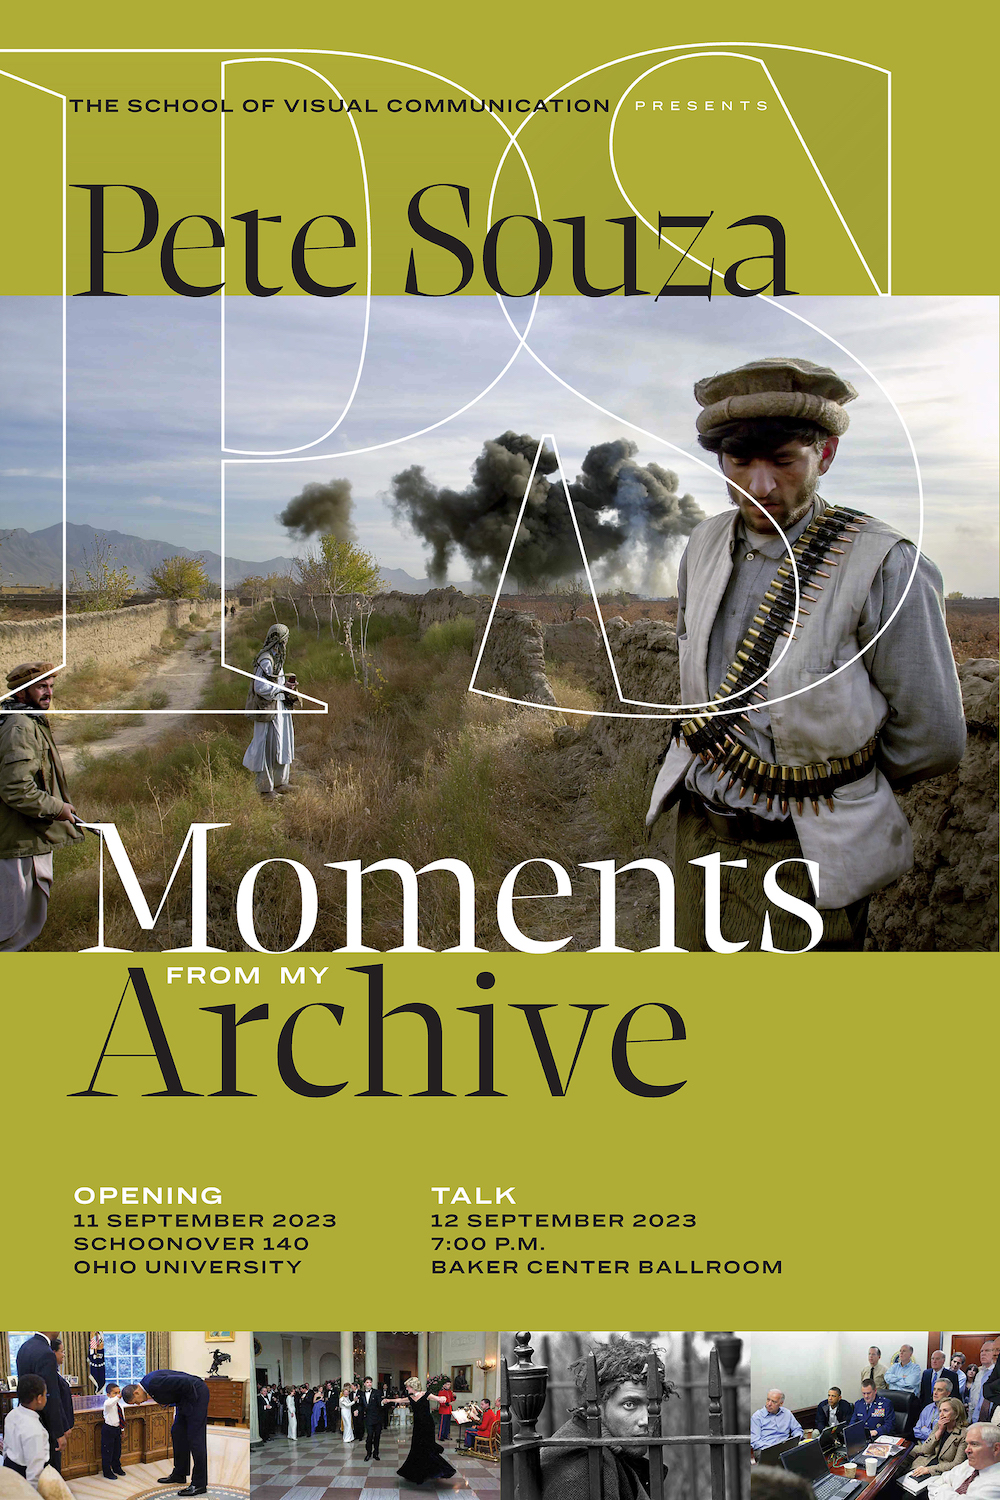 The flyer for the Pete Souza exhibition that is opening September 11. The flyer show's one of the photographer's photos of a person close to the camera against a desert landscpe.